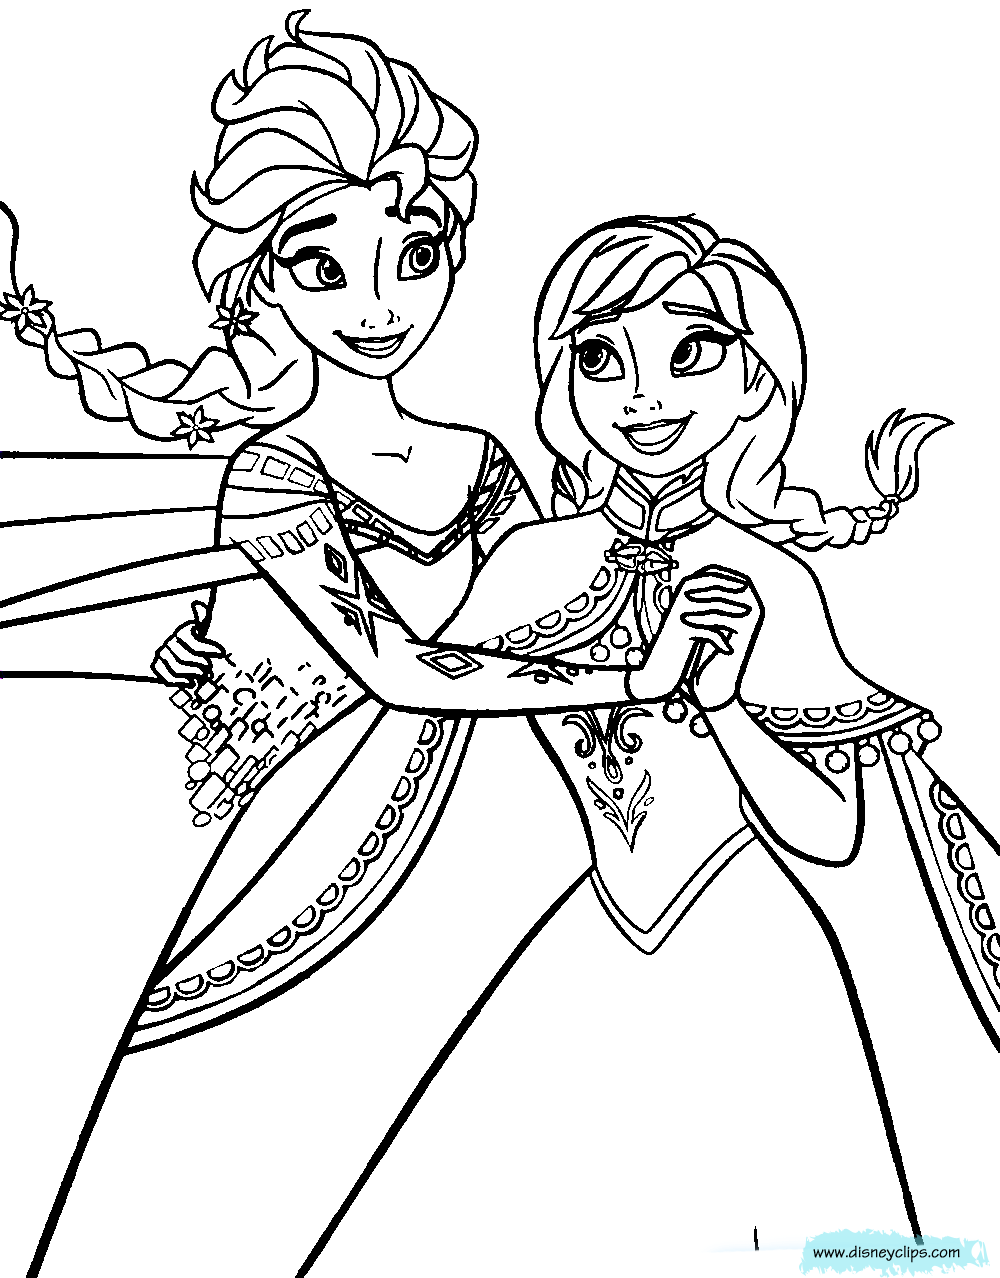 frozen-elsa-and-anna-coloring-page-0018-q1